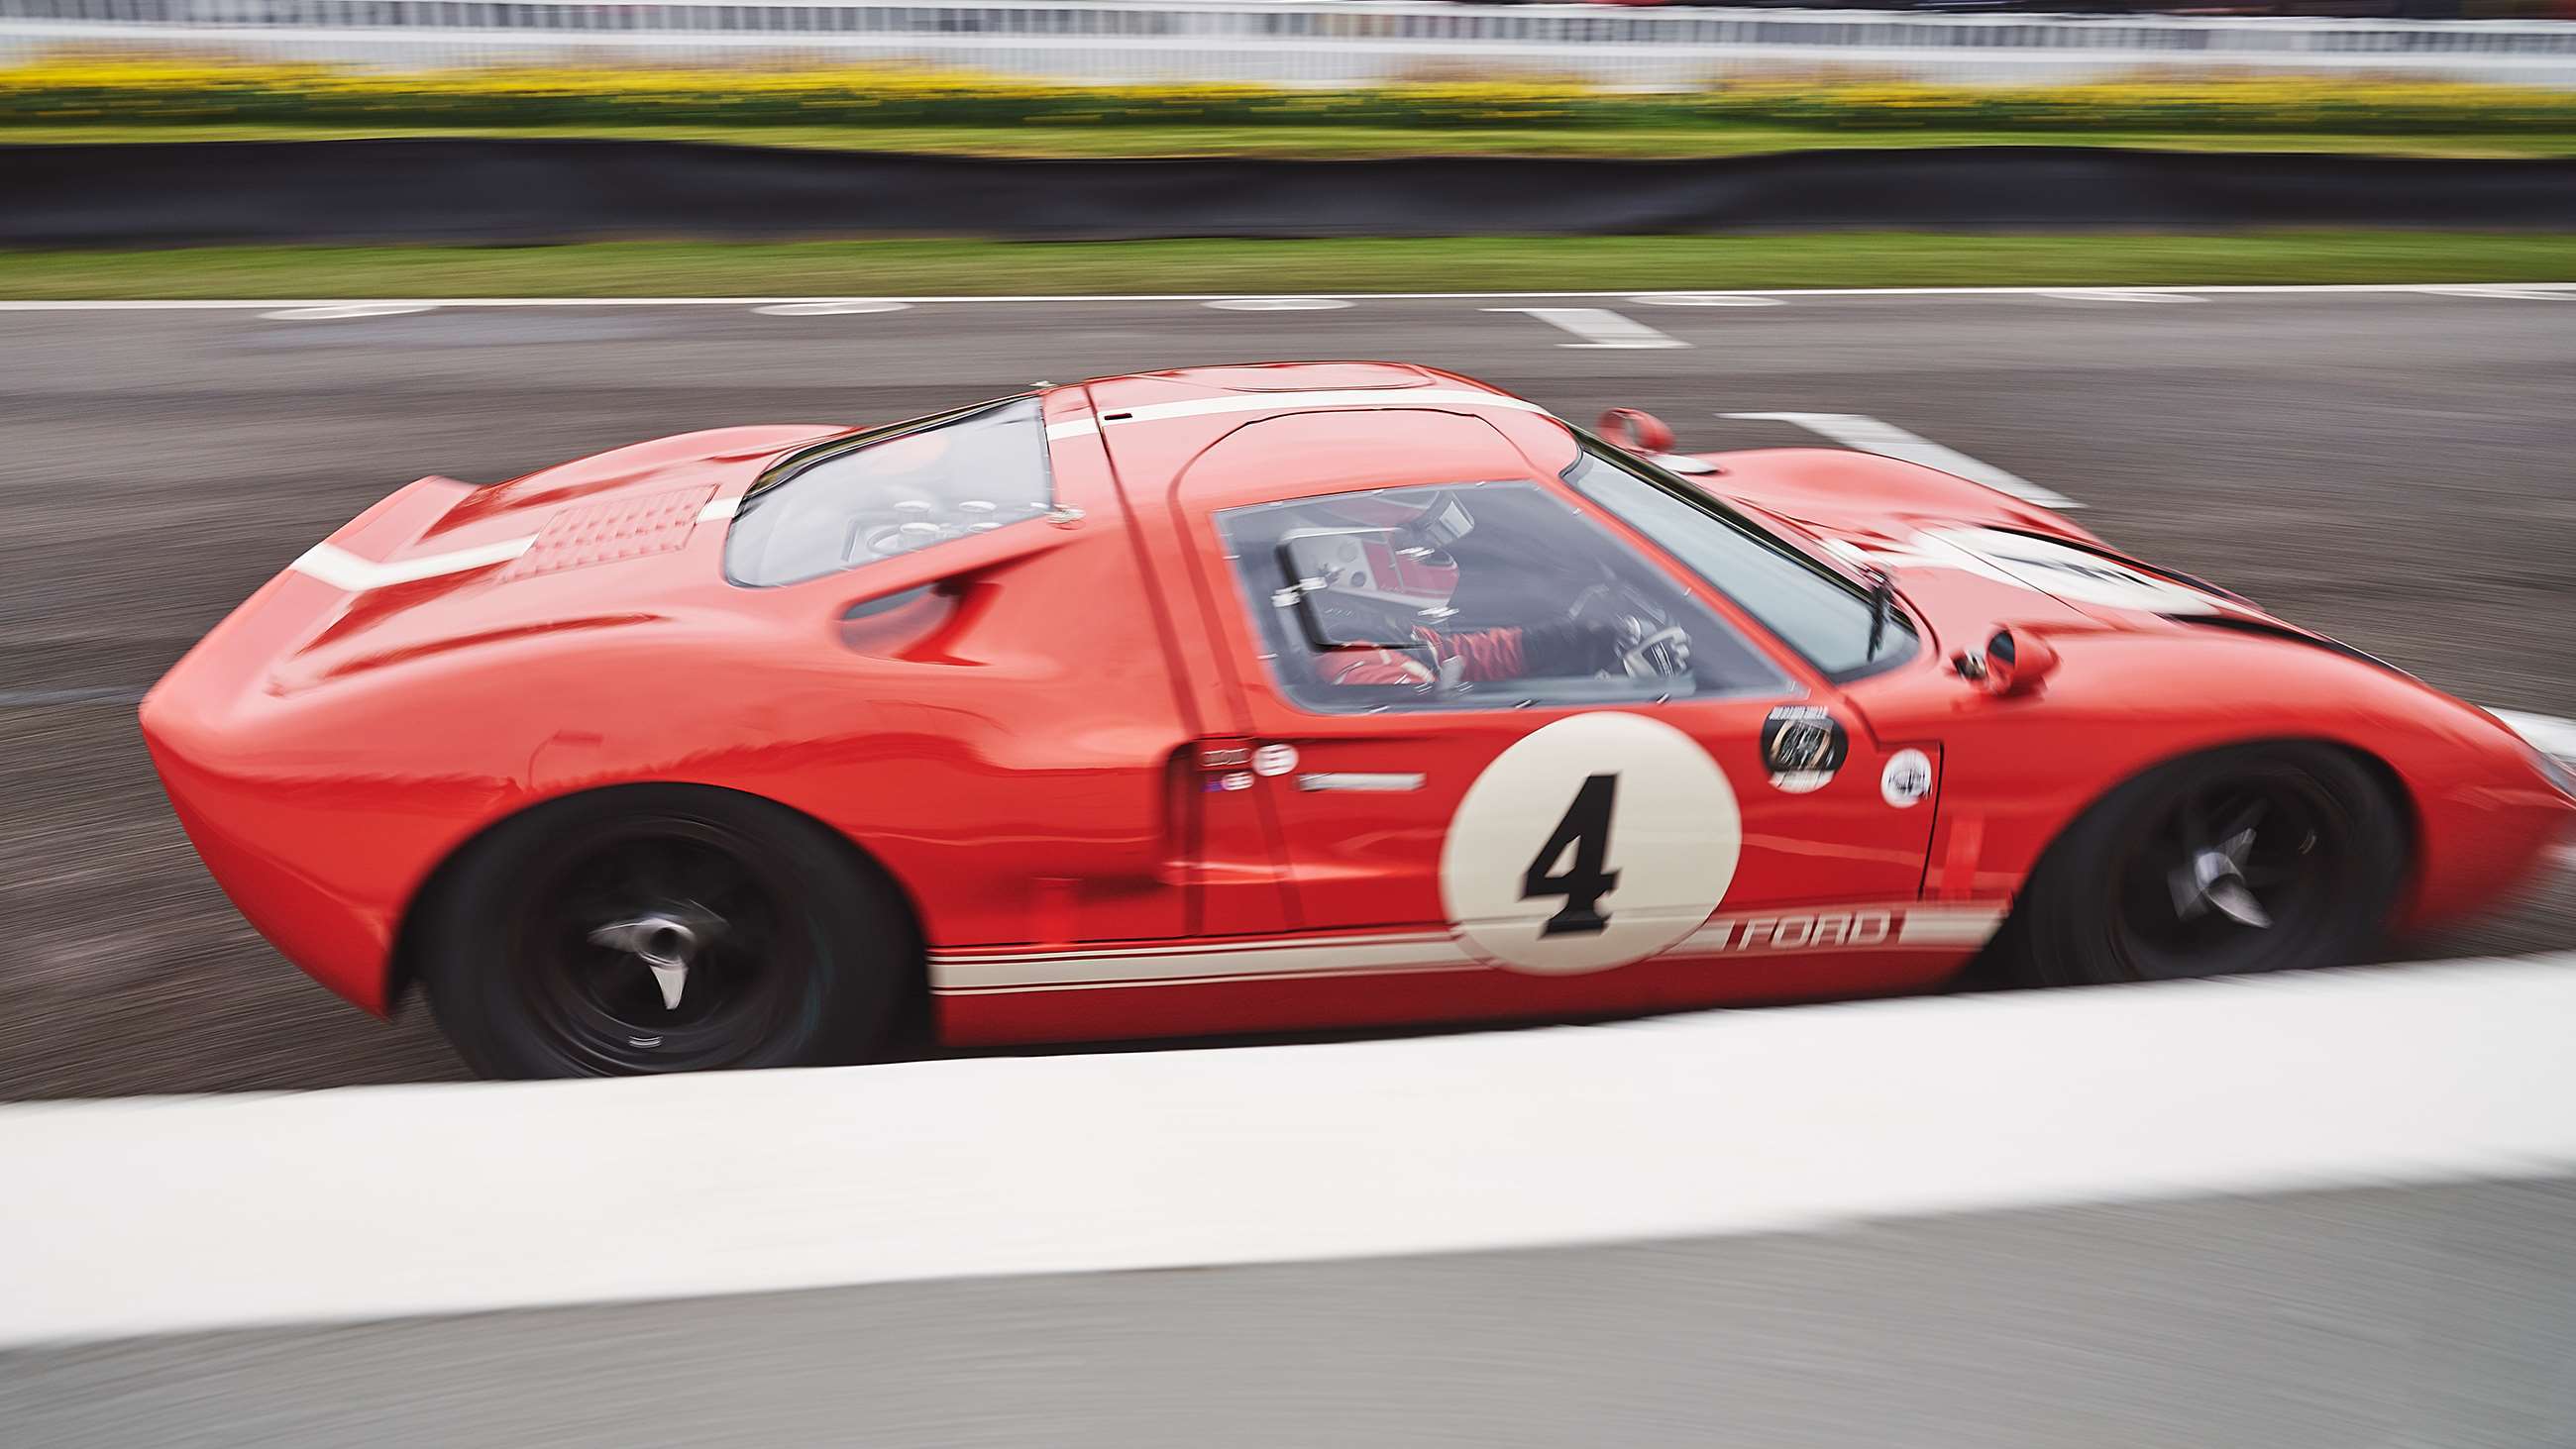 76mm-77mm-gurney-cup-dominic-james-ford-gt40-goodwood-09042019.jpg